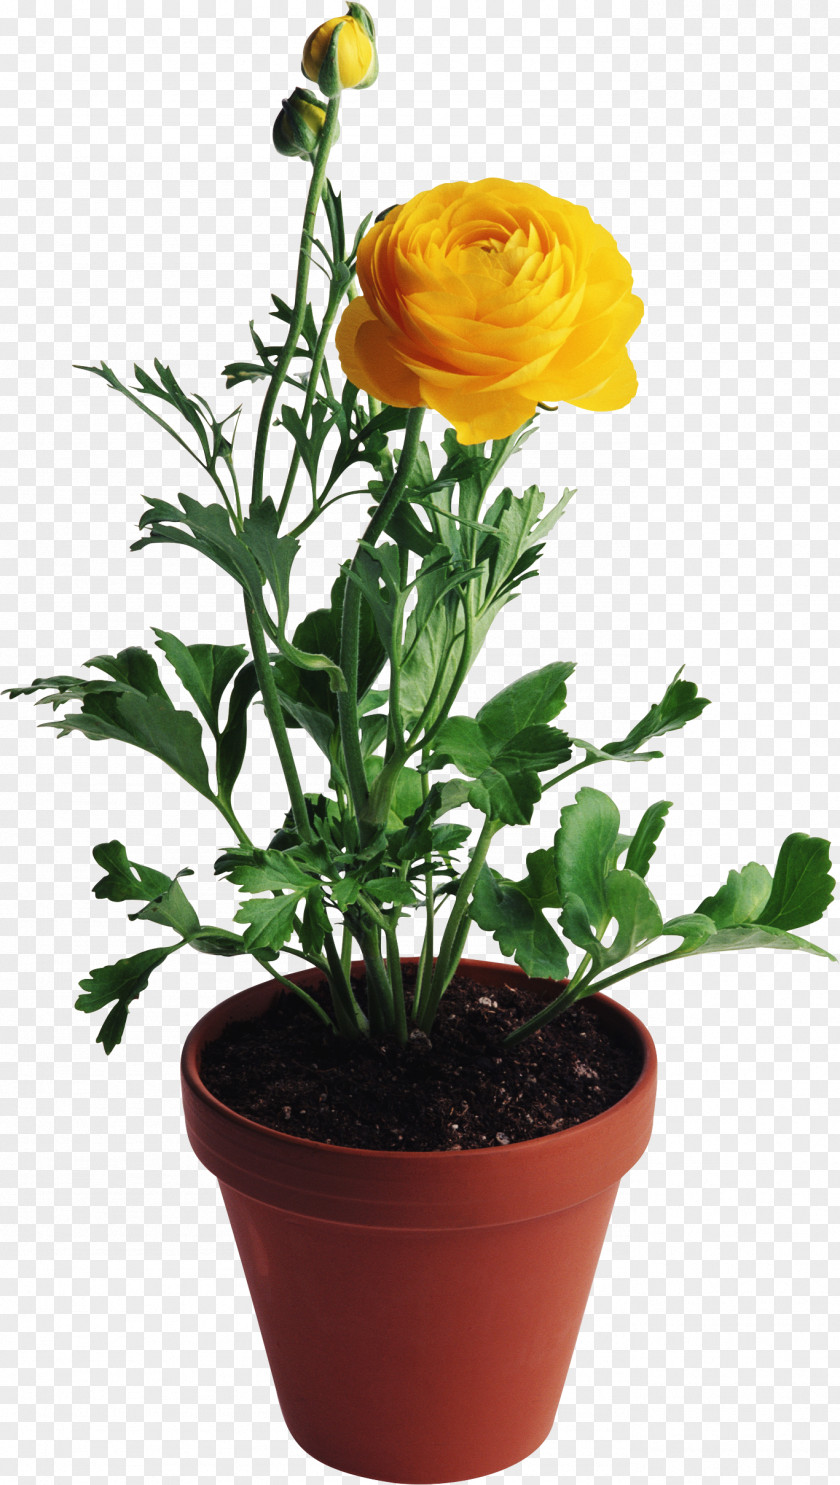 Potted Plant Flower Vase Rose Yellow PNG